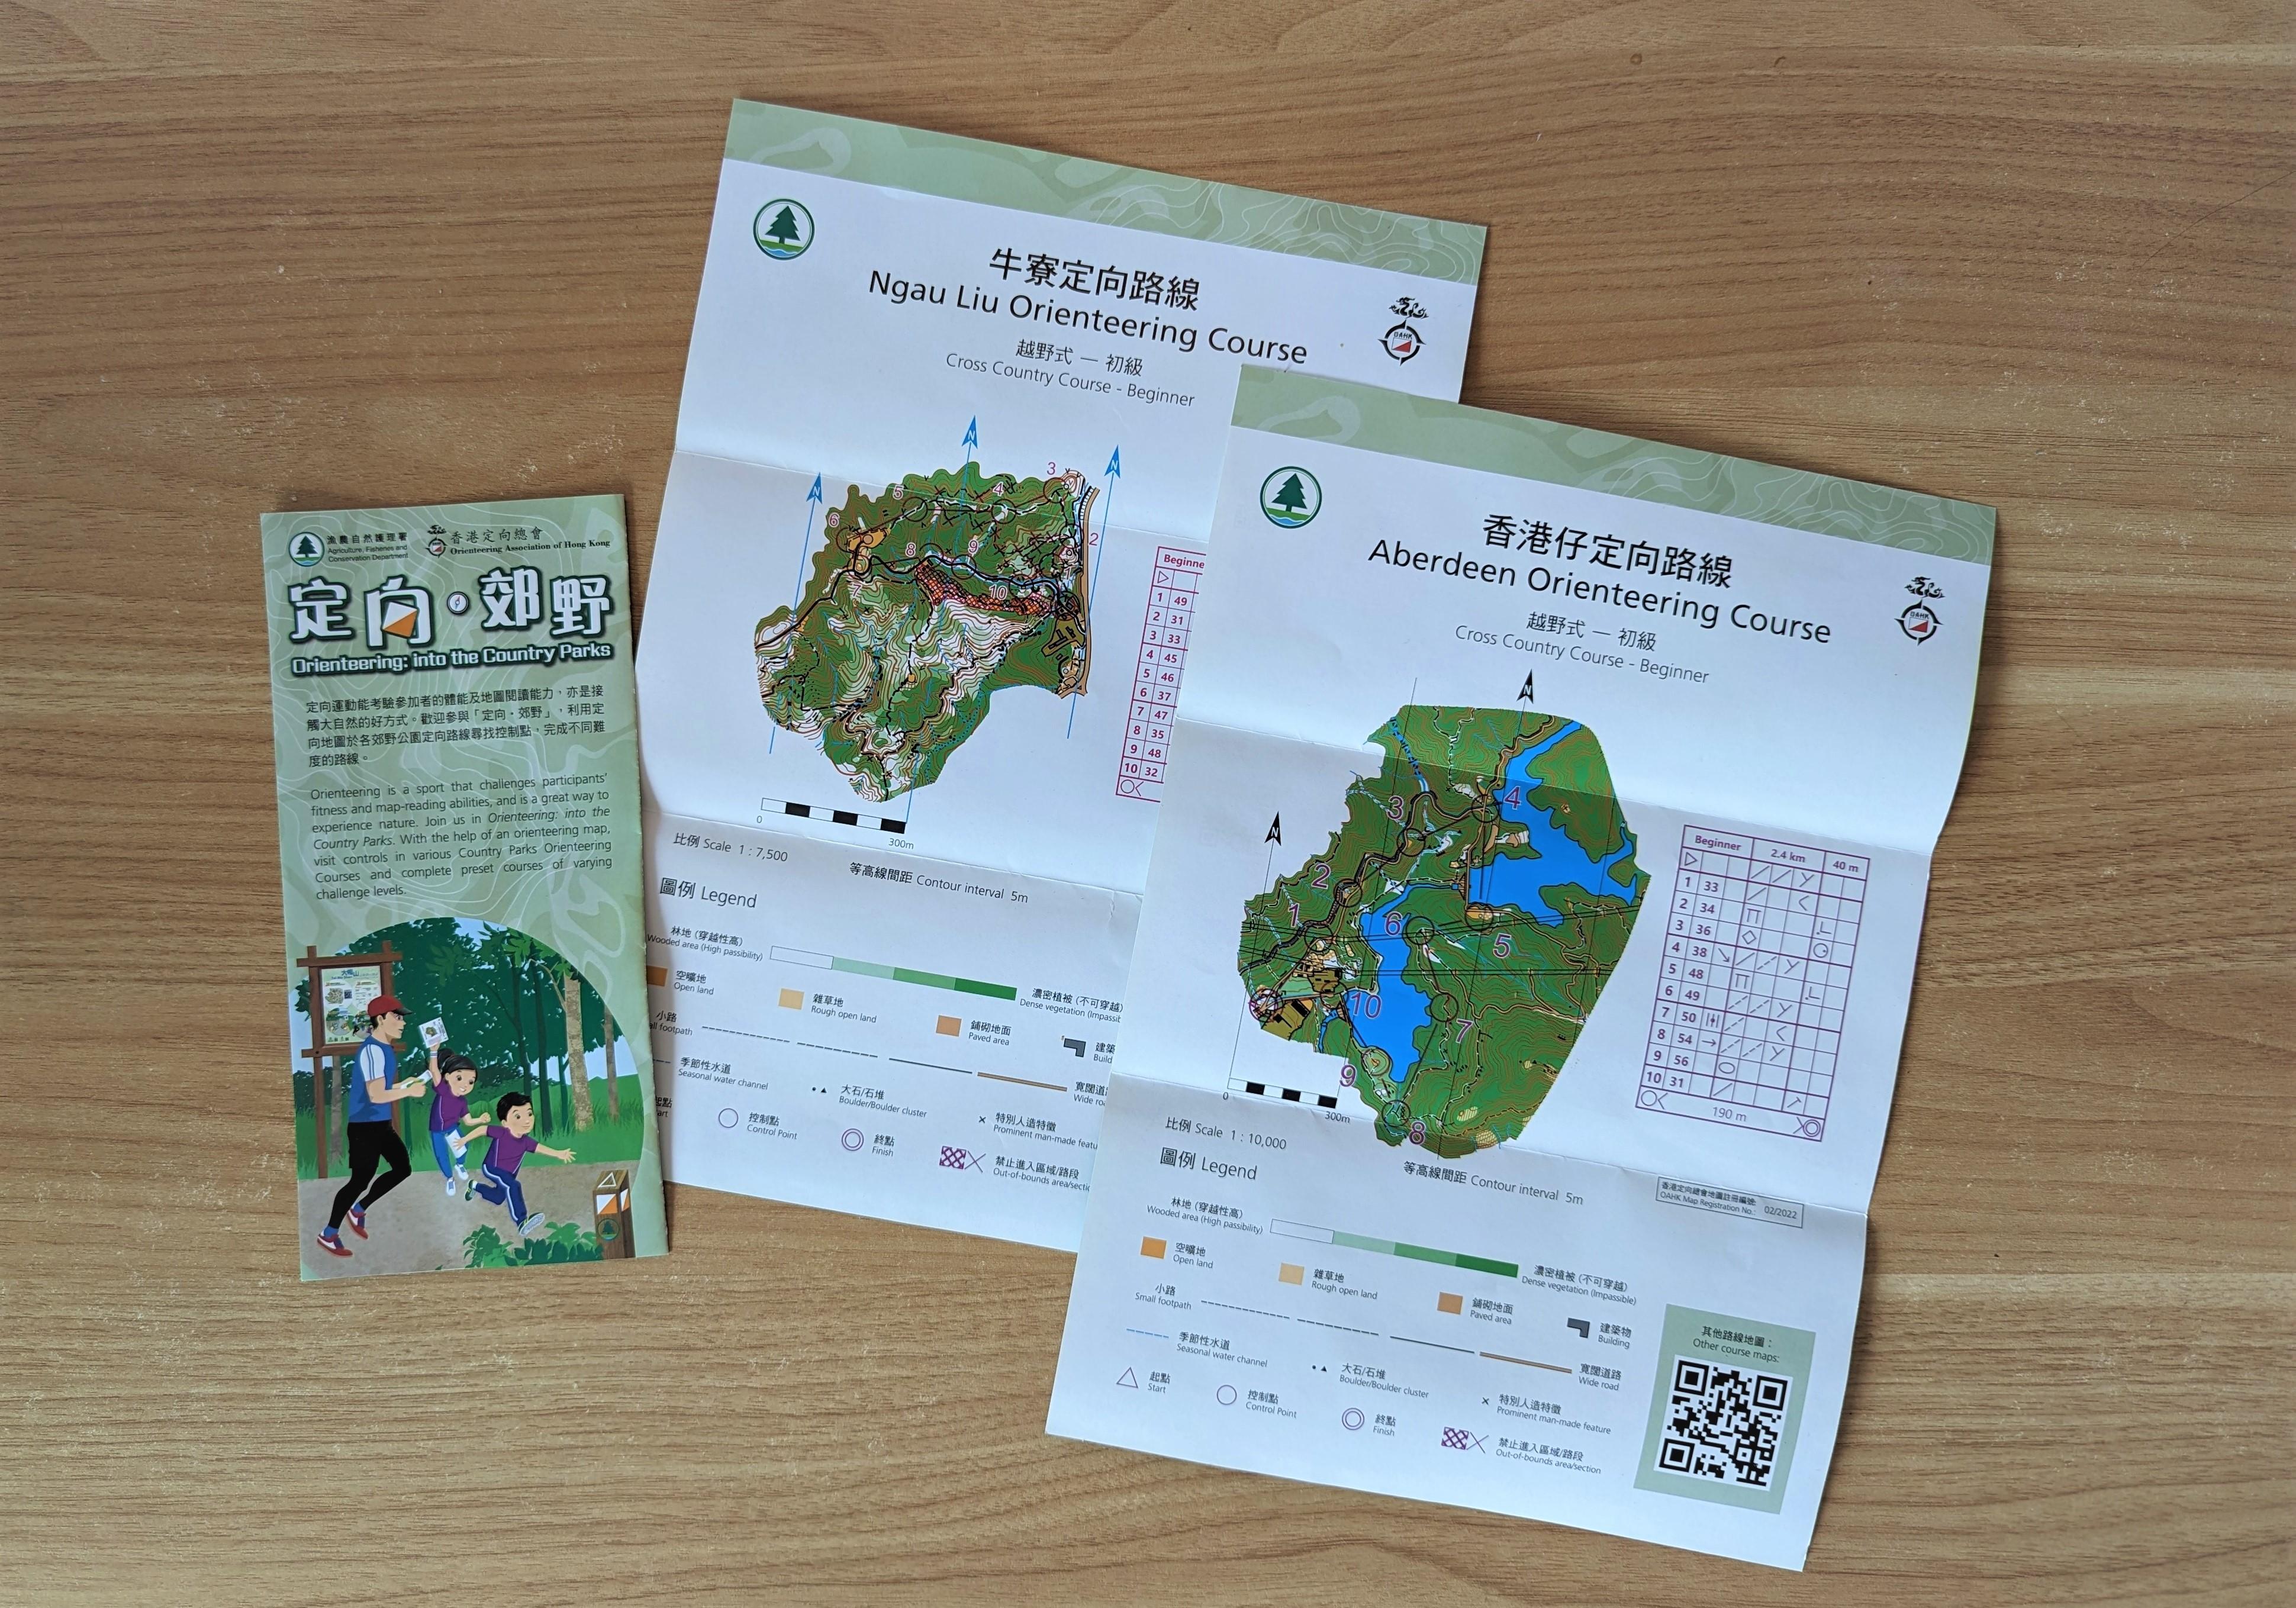 The Agriculture, Fisheries and Conservation Department announced today (May 16) that the department and the Orienteering Association of Hong Kong will hold the World Orienteering Day Carnival on May 20 and May 21 at Tai Tong Barbecue Area (Site No. 1, 6 and 7) in Tai Lam Country Park. Members of the public are welcome to take part in the activity. Photo shows orienteering course introductory leaflets available at country park visitor centres.